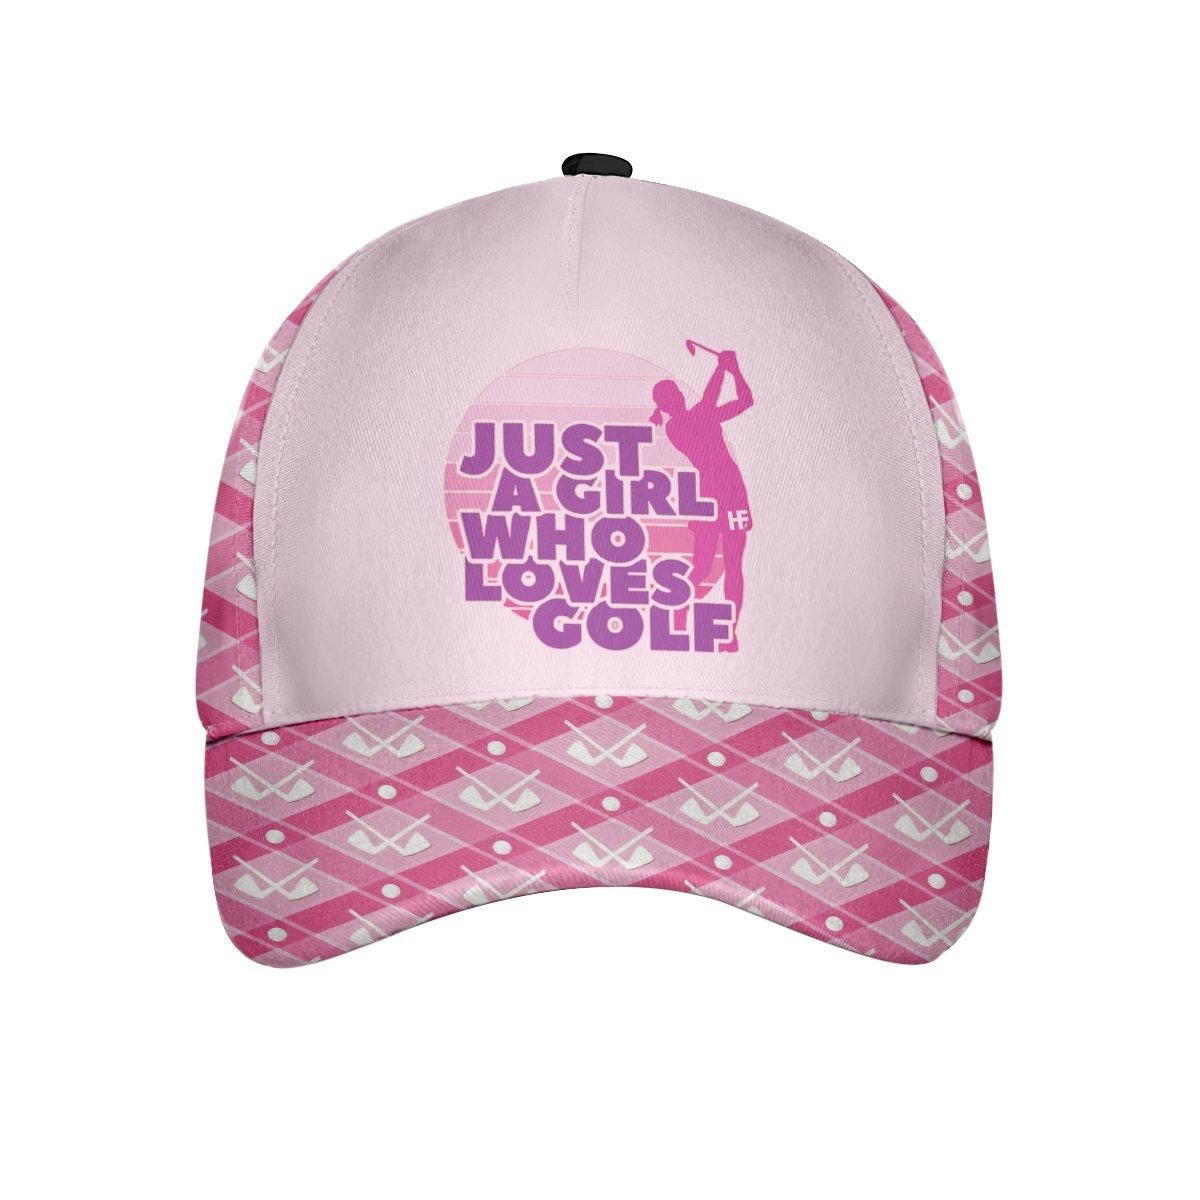 Just A Girl Who Loves Golf Pink Color Cap